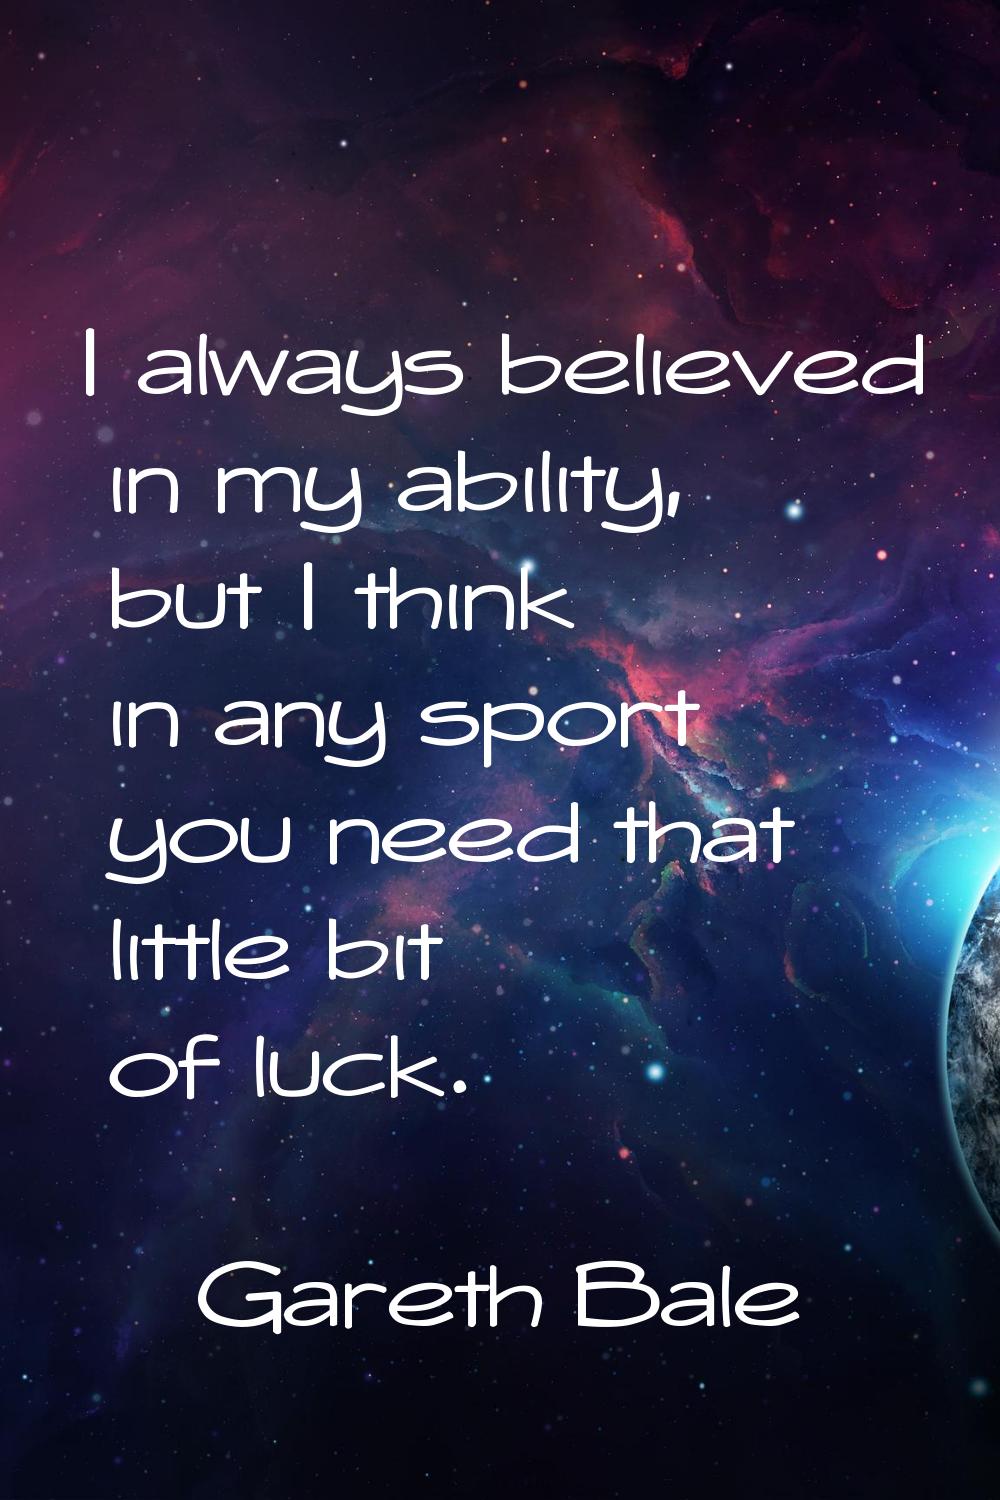 I always believed in my ability, but I think in any sport you need that little bit of luck.